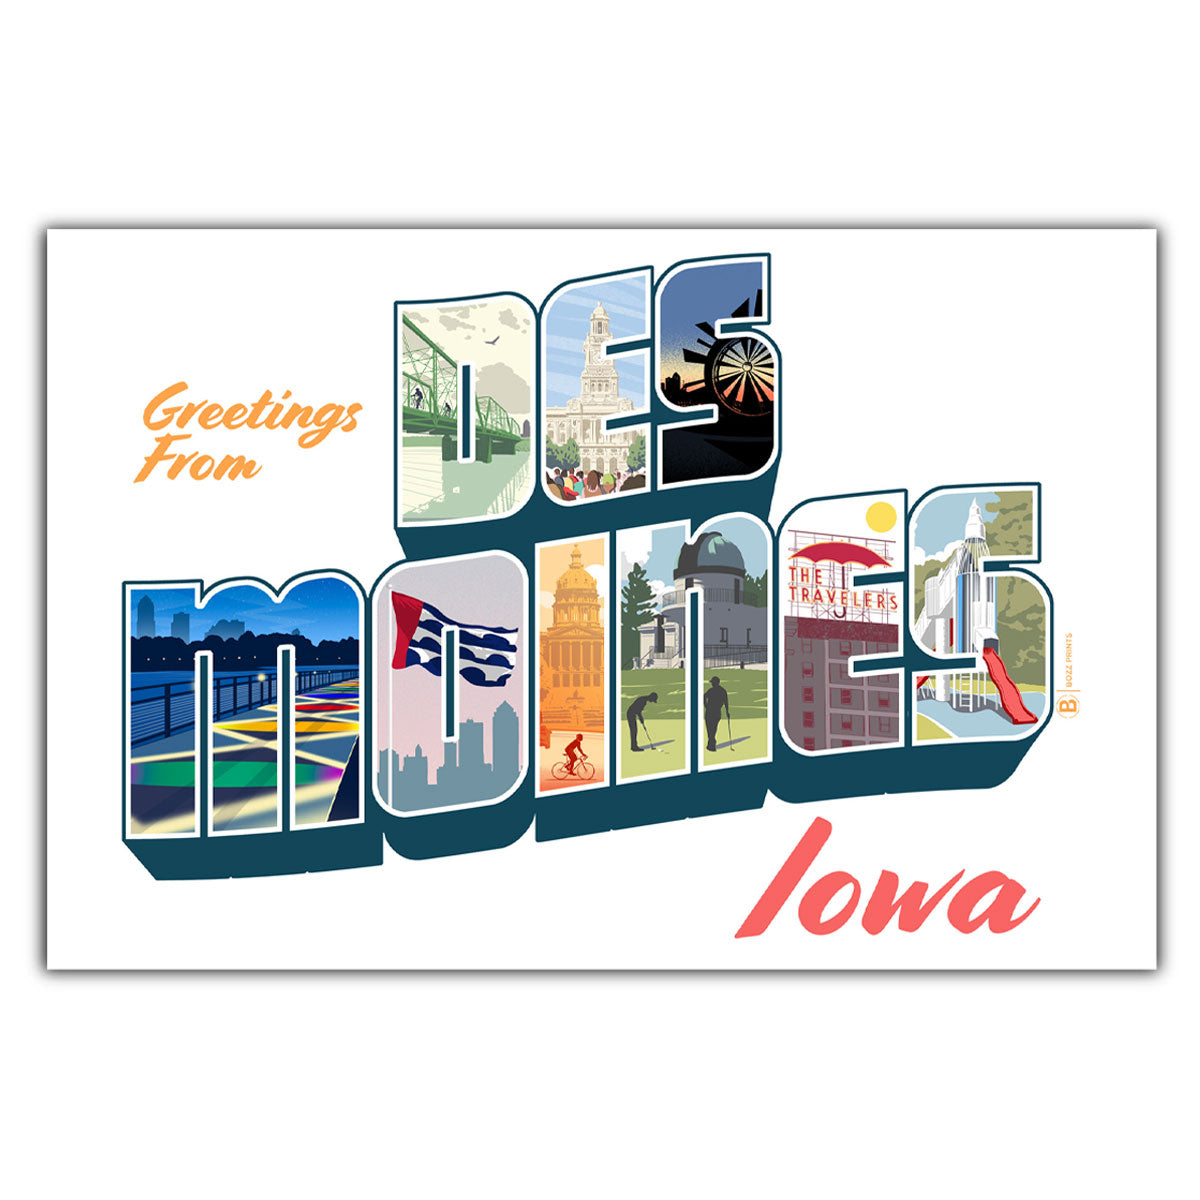 Greetings from Des Moines Postcard - Bozz Prints